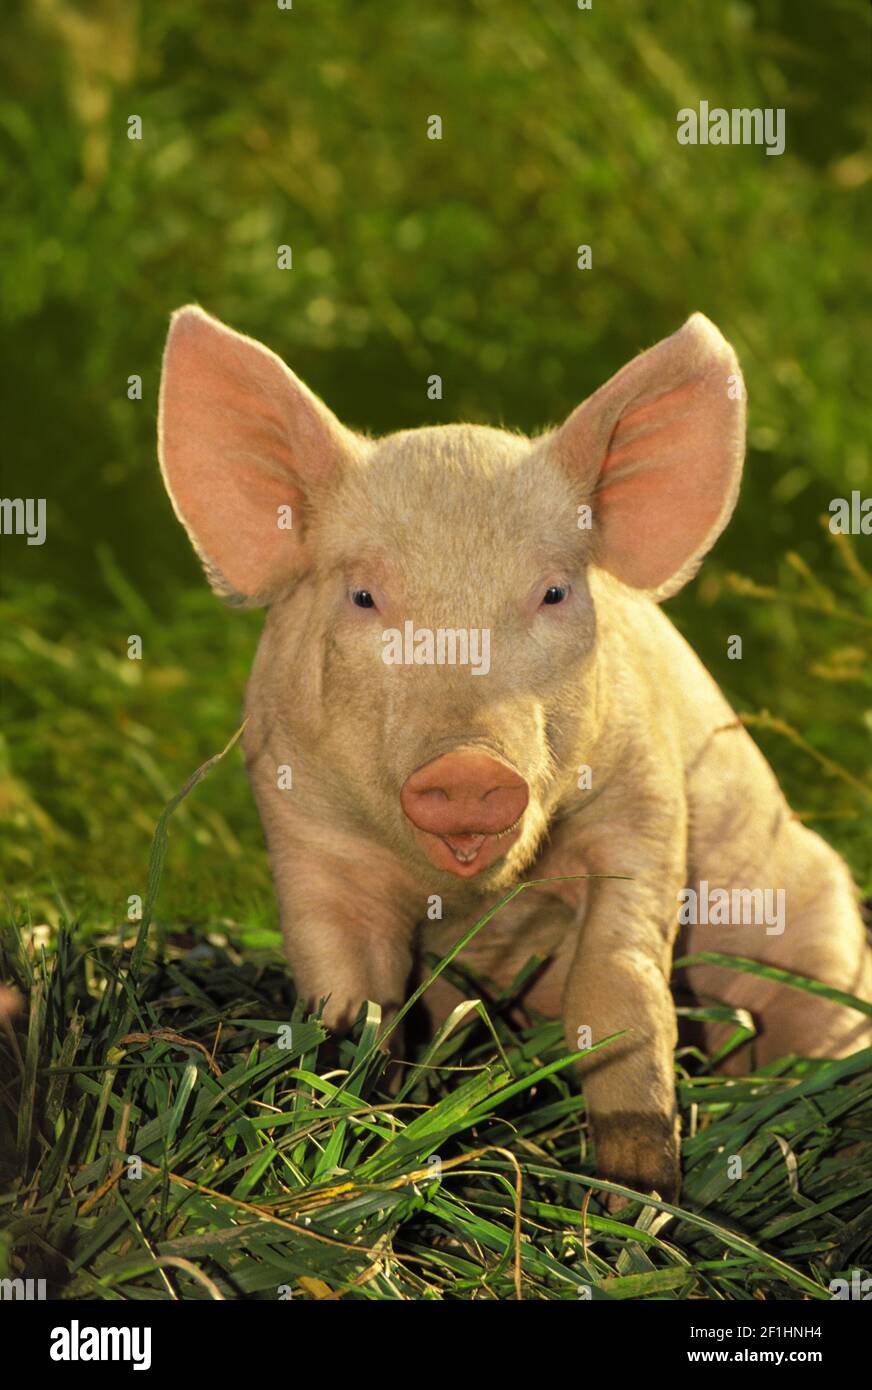 Pig in the evening smiling with ears up, Missouri, USA Stock Photo